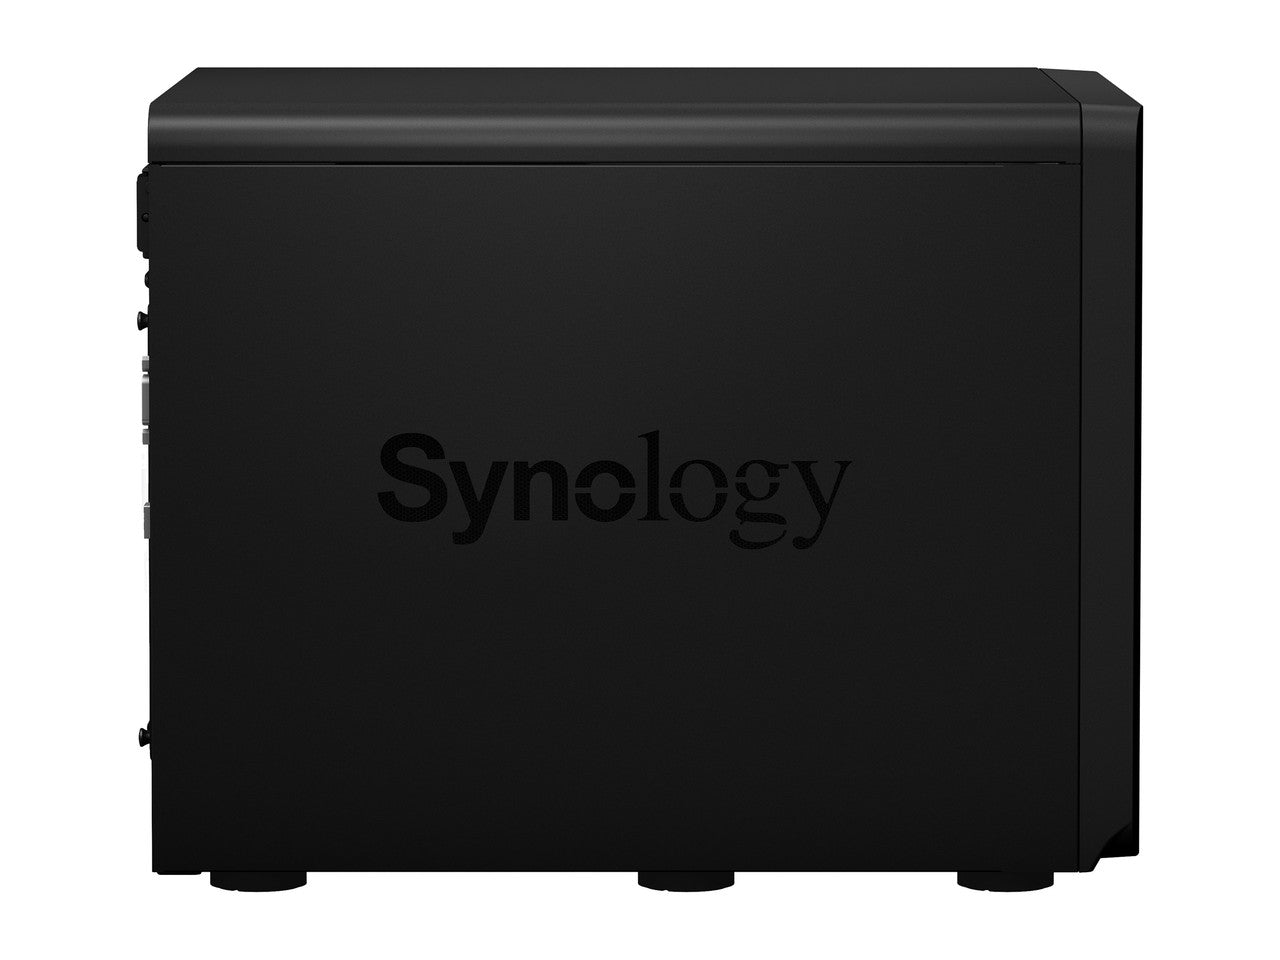 Synology DS2422+ Quad Core 2.2Ghz 12-Bay NAS with 16GB RAM and 96TB (12 x 8TB) of Synology Enterprise (HAT5300) Drives